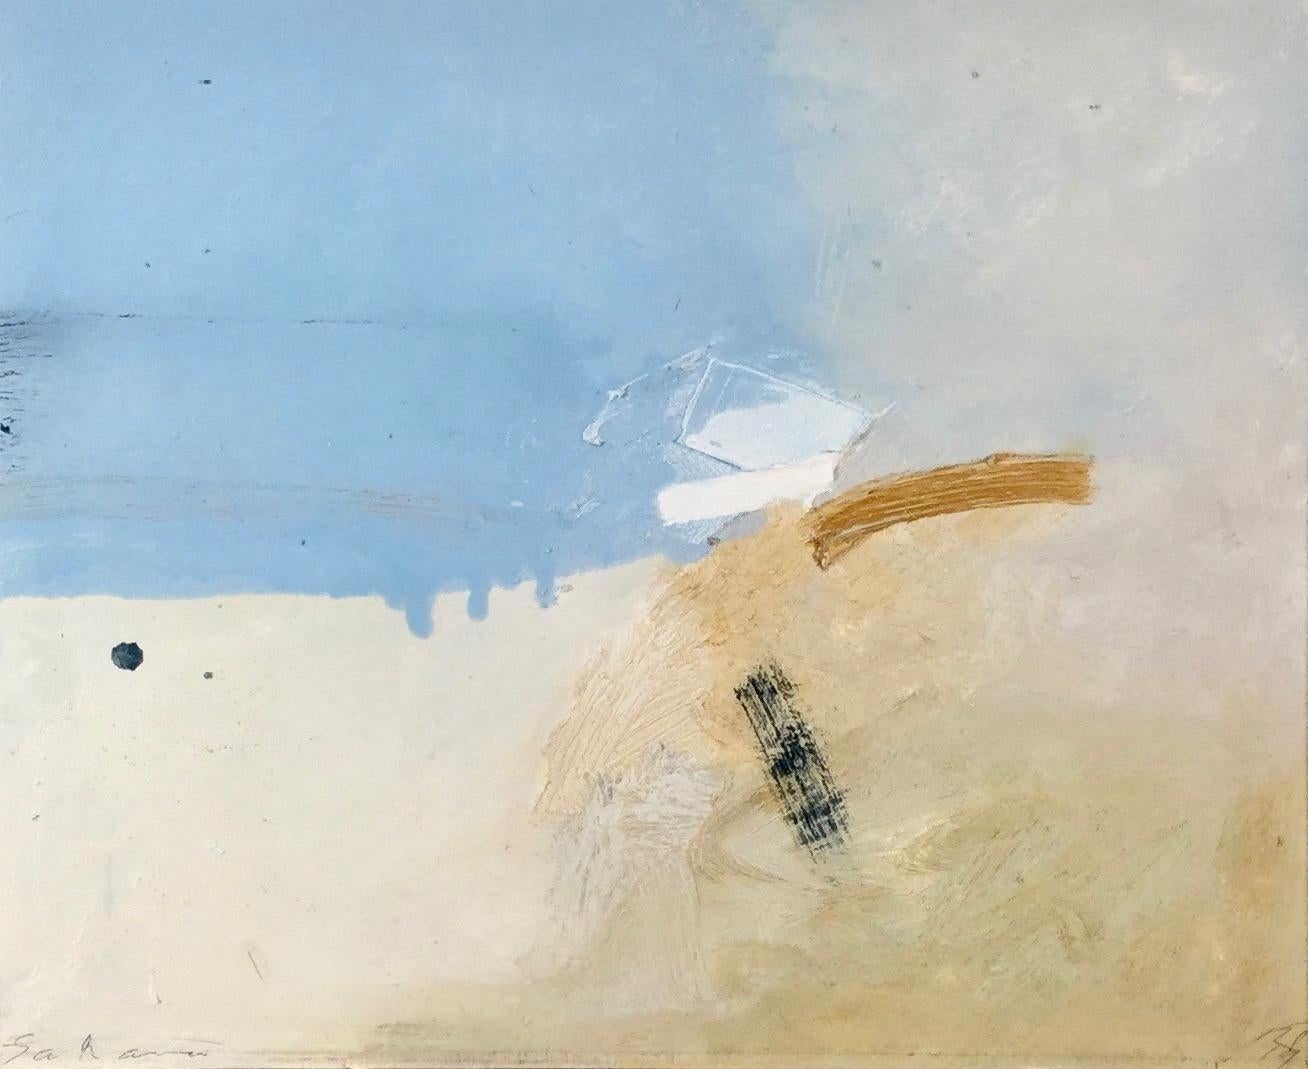 Keith Purser lives and works on the edge of the desert-like environment of Europe's largest shingle bank, in the shadow of Dungeness power station and within sight of the coast of France. Born in Bromley, Kent, he attended Sidcup School of Art in